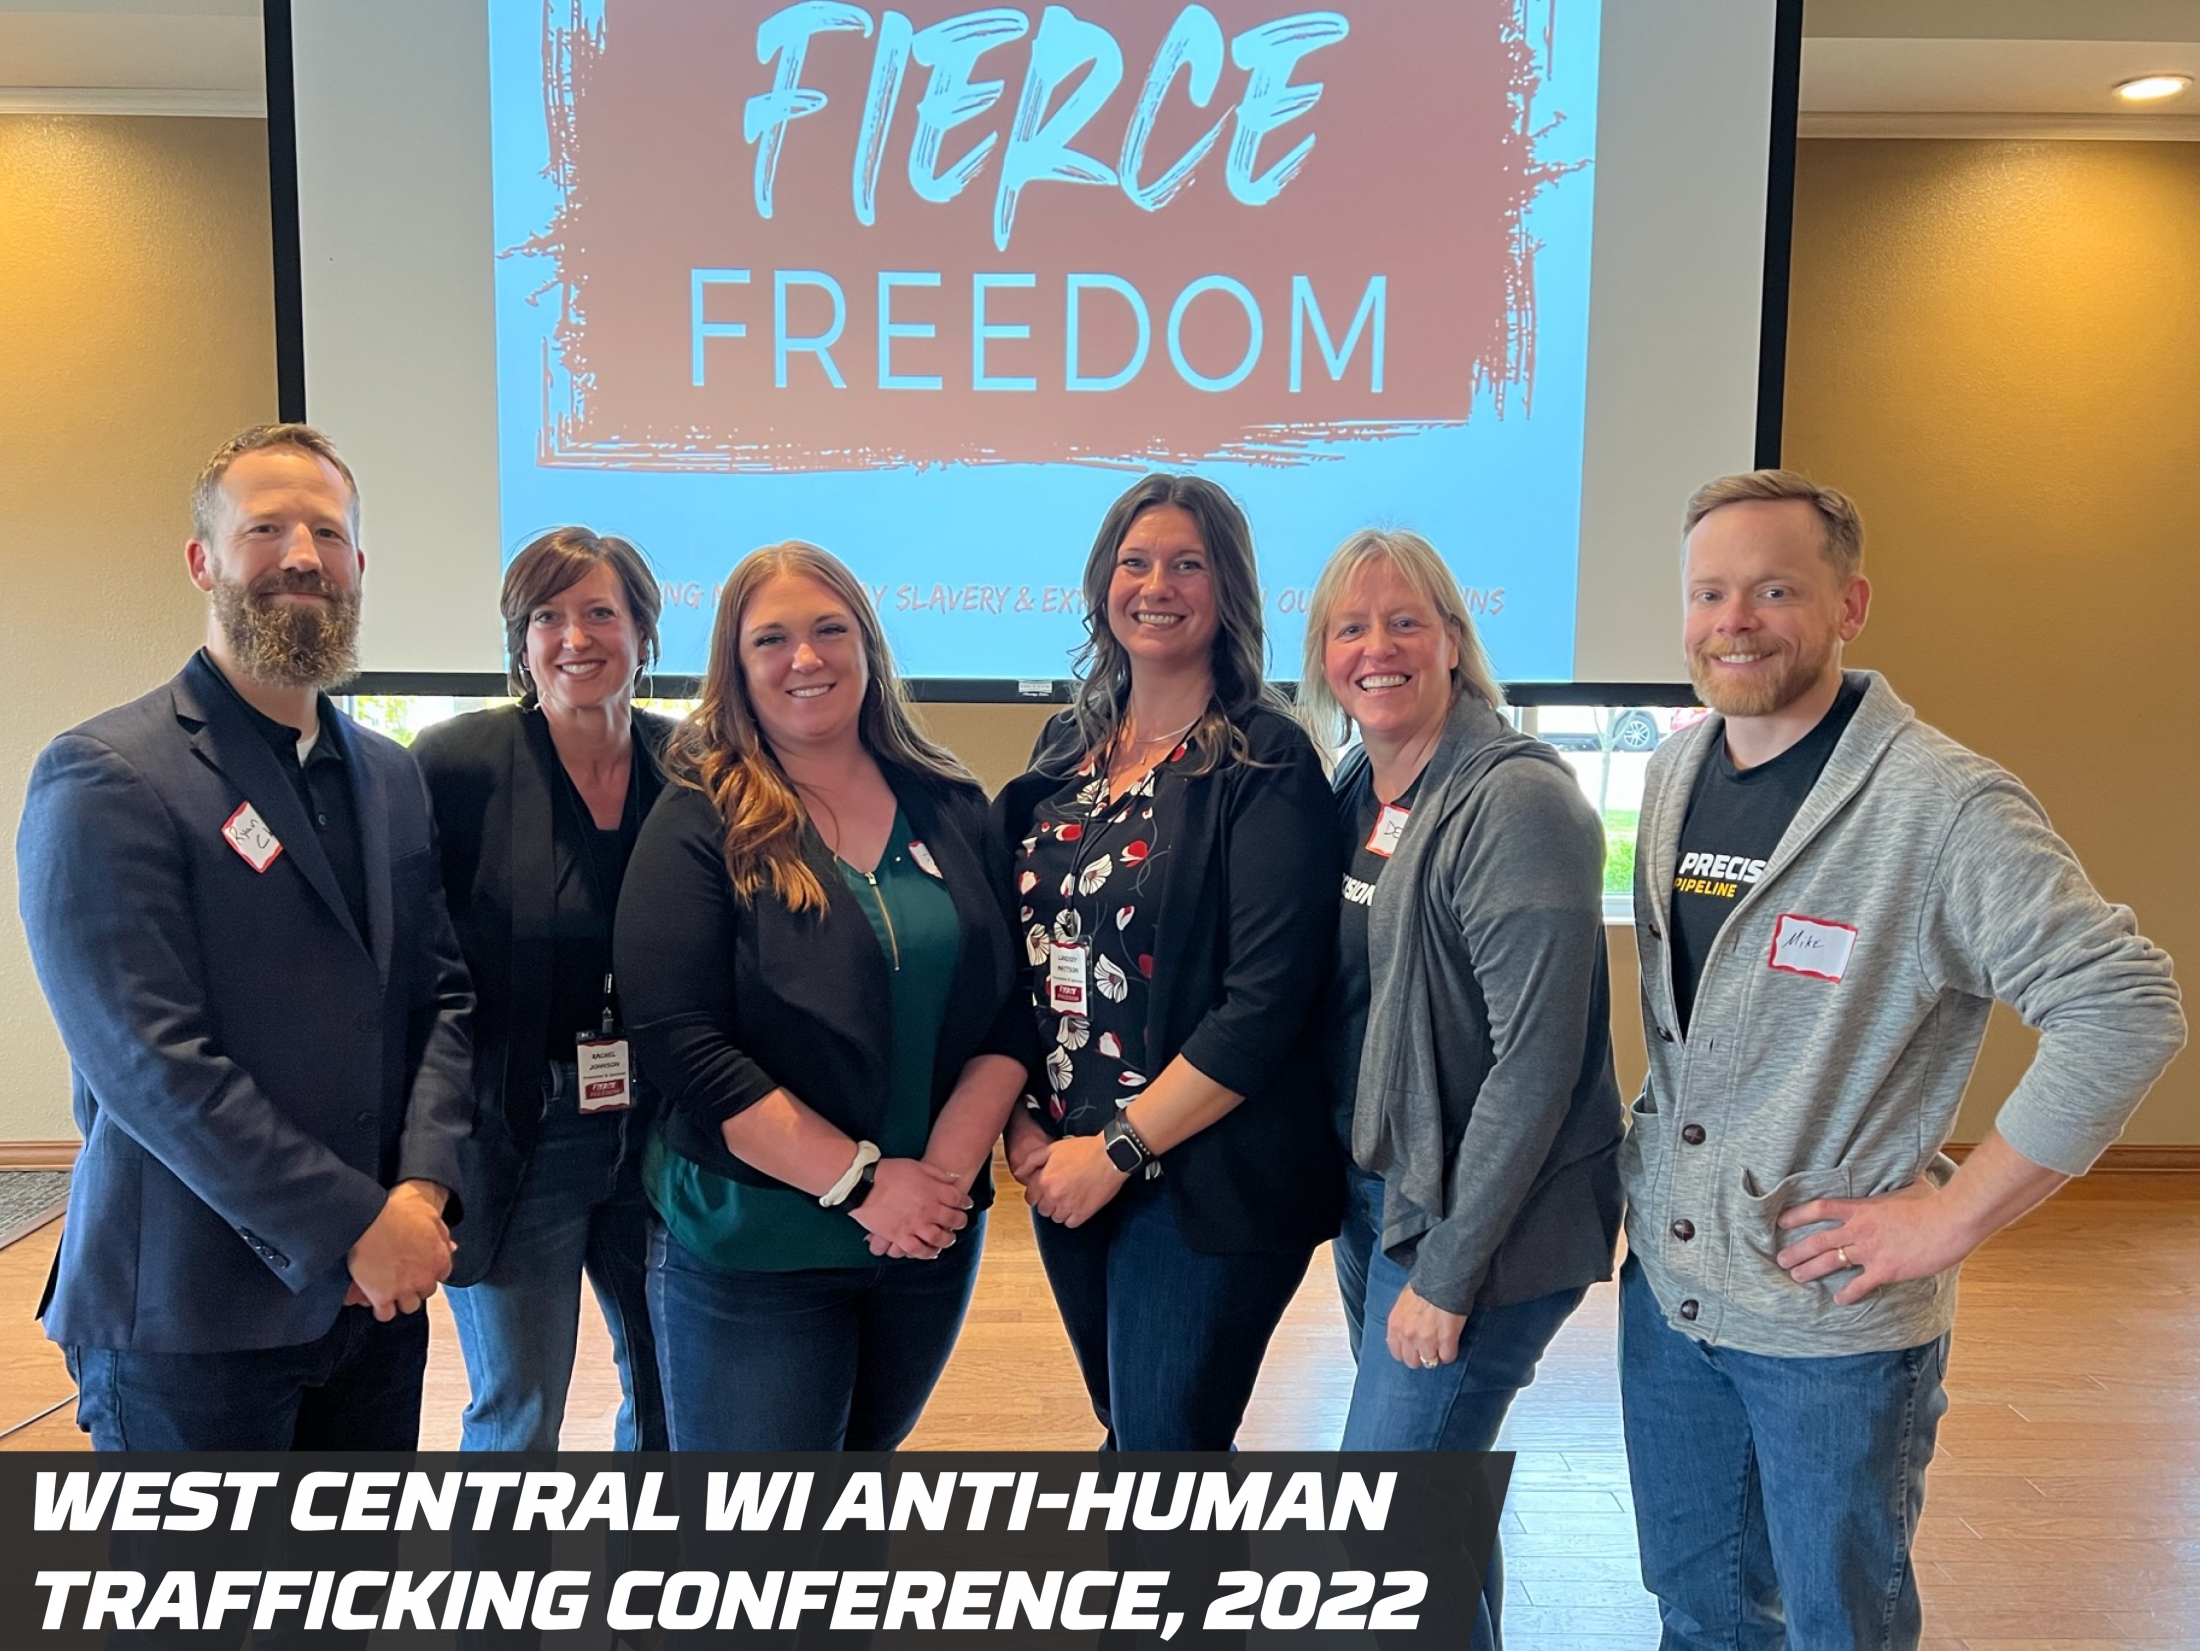 Presents at Fierce Freedom's West Central Wi Anti-Human Trafficking Conference, 2022